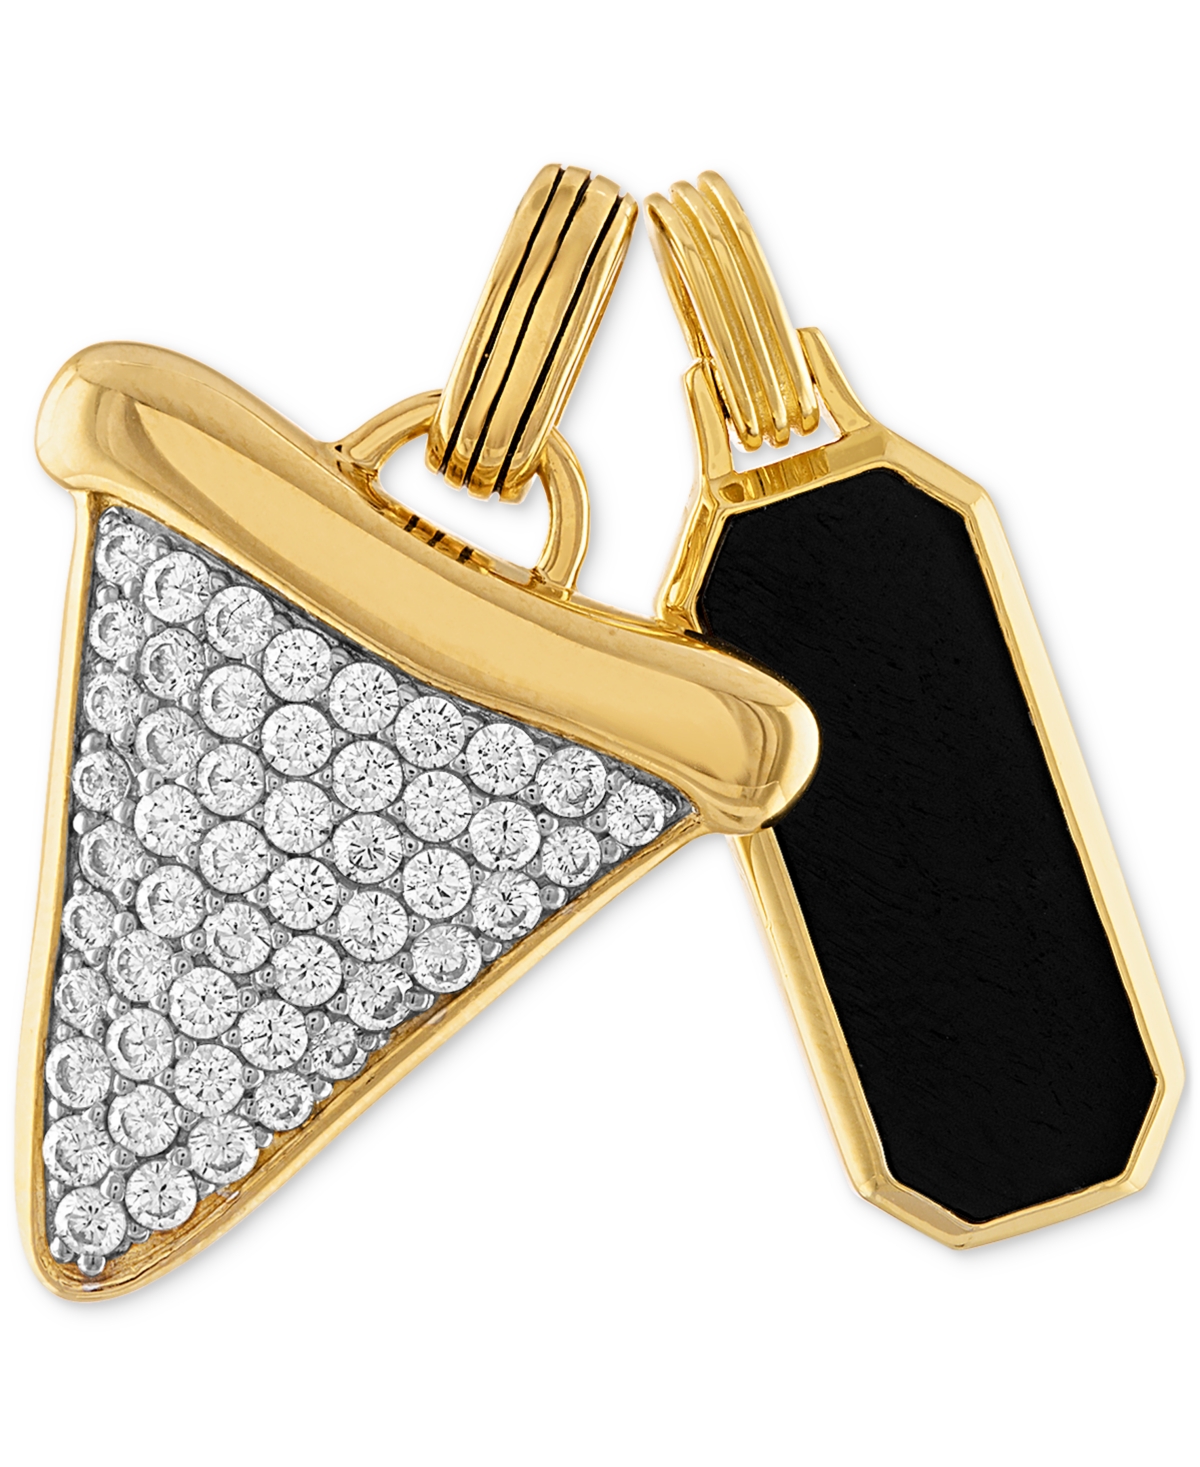 2-Pc. Set Onyx Dog Tag & Cubic Zirconia Pave Shark Tooth Amulet Pendants in 14k Gold-Plated Sterling Silver, Created for Macy's